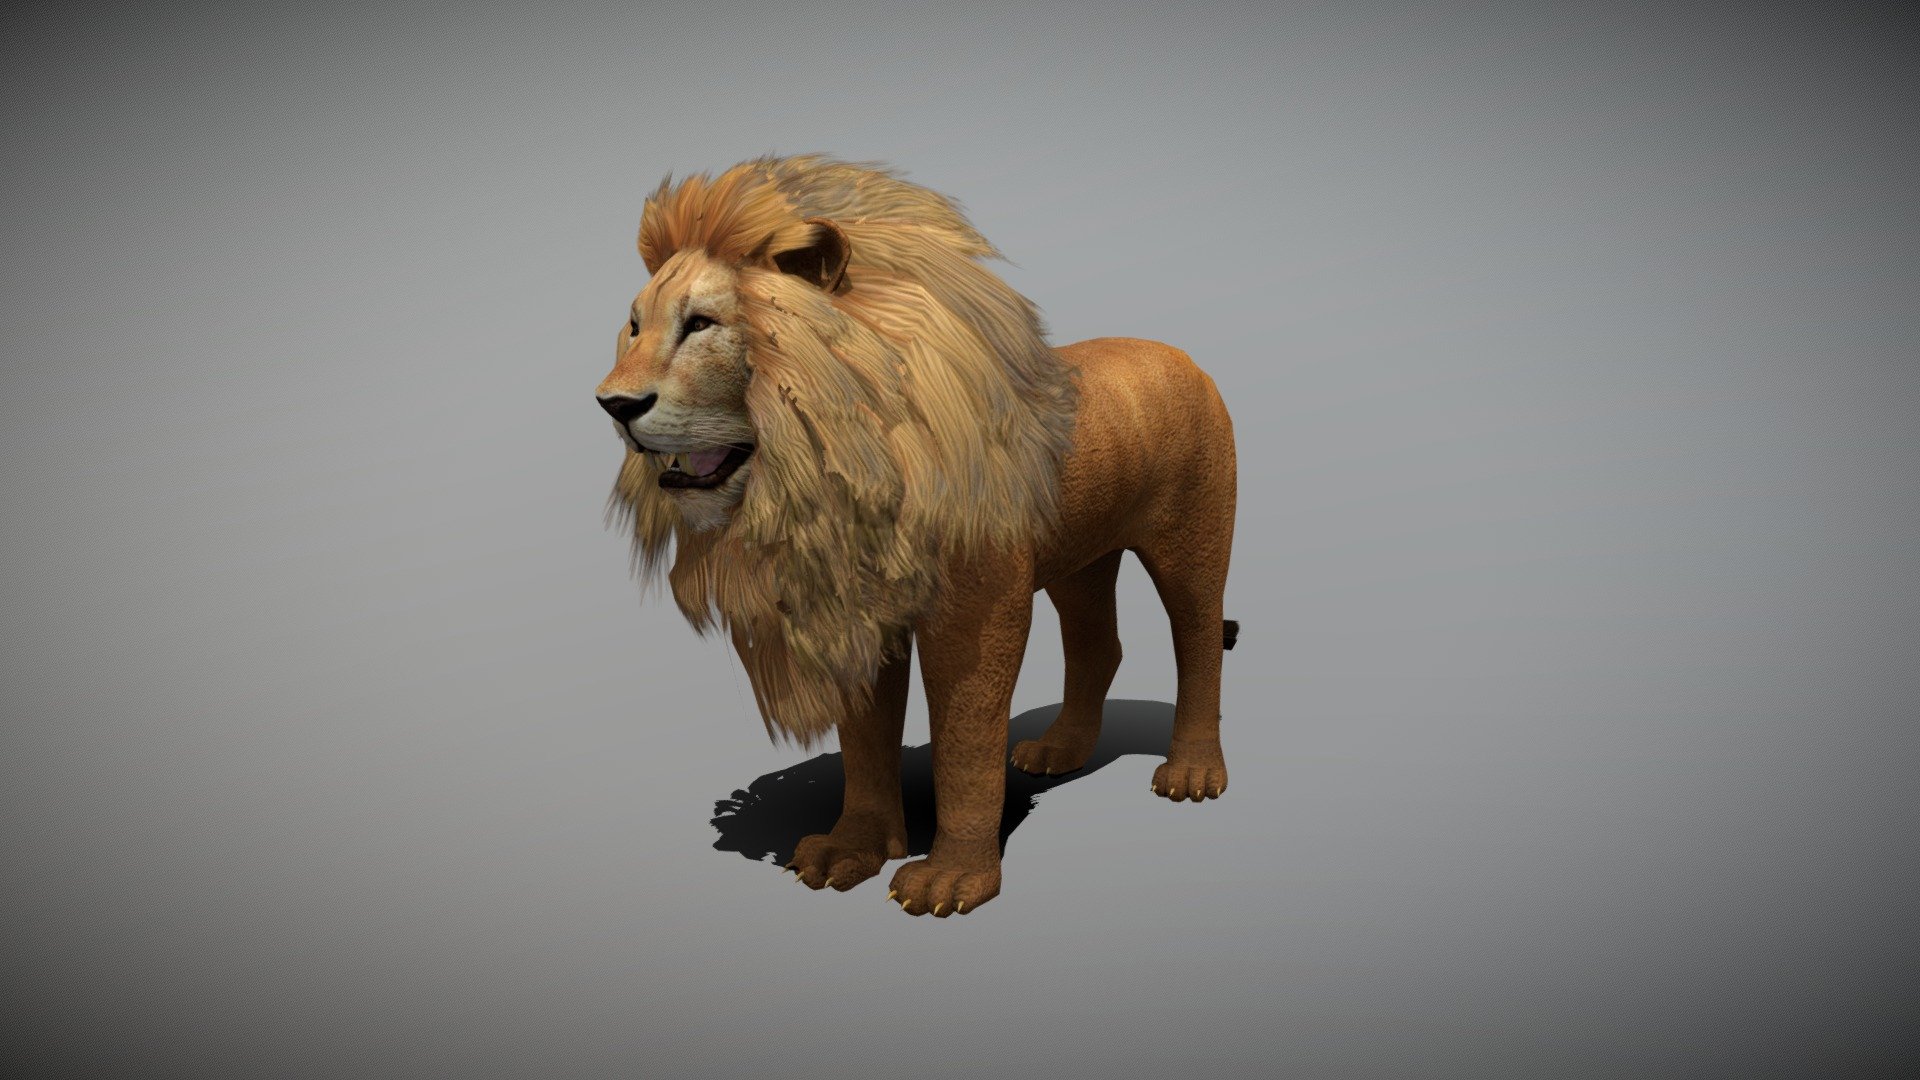 WATCH = https://youtu.be/P9Zxj4QPqeQ
3D Lion Realistic Character

PACKAGE INCLUDE

High quality model, correctly scaled for an accurate representation of the original object
High Detailed Photorealistic Lion, completely UVmapped and smoothable
Model is built to real-world scale.
Many different format like blender, fbx, obj, iclone, dae
Separate Loopable Animations
Ready for animation
High Quality materials and textures
Triangles = 5180
Vertices = 3192
Edges = 8257
Faces = 5180

ANIMATIONS

Idle
Walk
Walk Fast
Run
Attack Jump
Attacking
Eat
Howl
+Many different 3d Print Poses

NOTE

GIVE CREDIT BILAL CREATION PRODUCTION
SUBSCRIBE YOUTUBE CHANNEL = https://www.youtube.com/BilalCreation/playlists
FOLLOW OUR STORE = https://sketchfab.com/bilalcreation/models
LIKE AND GIVE FEEDBACK ON THE MODEL

CONTACT US                 =  https://sites.google.com/view/bilalcreation/contact-us
ORDER  DONATION   =  https://sites.google.com/view/bilalcreation/order - Lion with Animation - Buy Royalty Free 3D model by Bilal Creation Production (@bilalcreation) 3d model